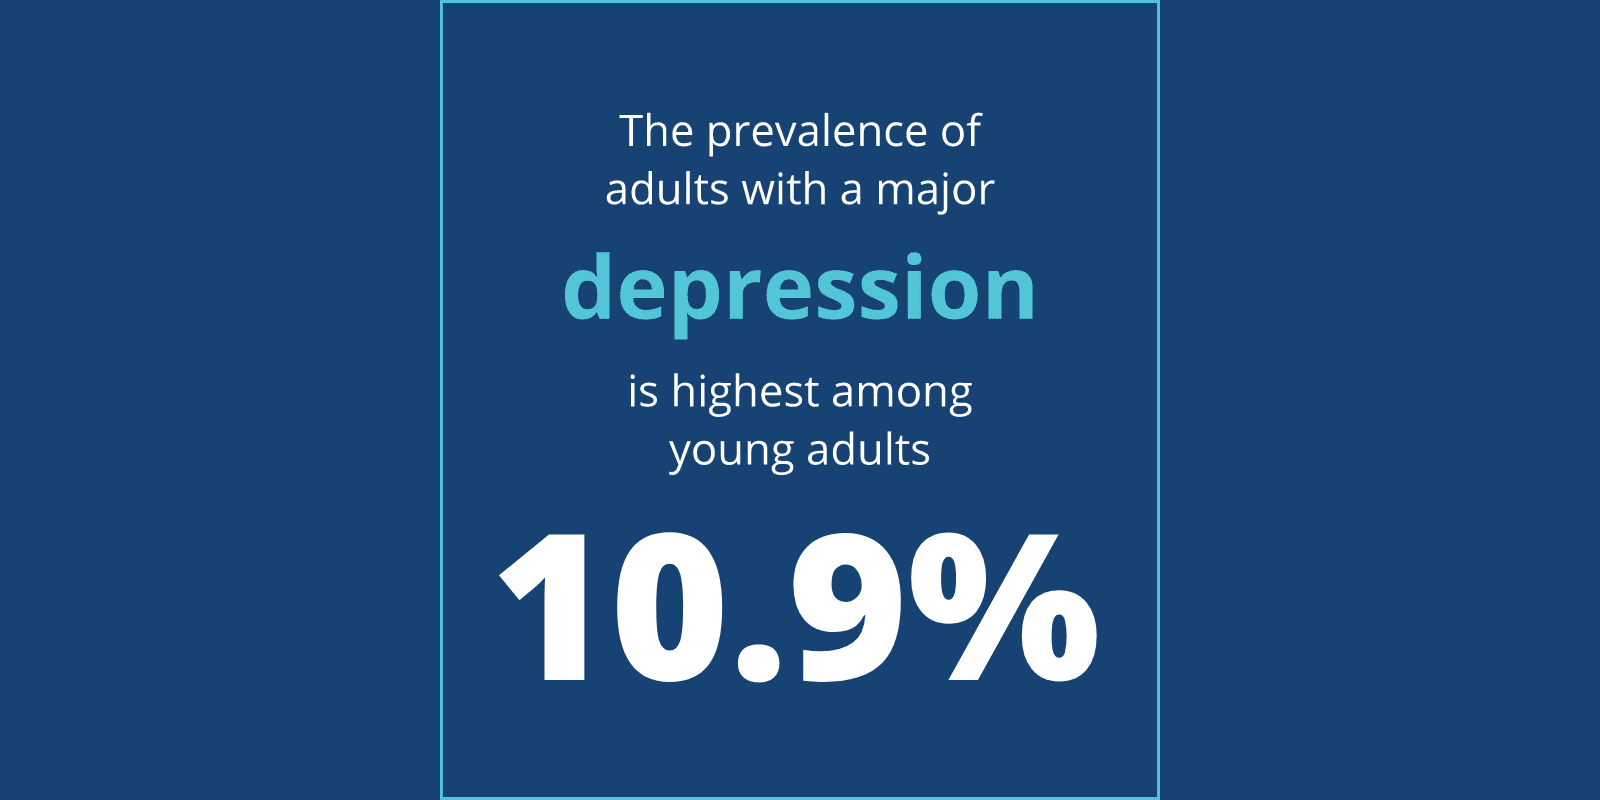 The prevalence of adults with a major depression is highest among young adults as 10.9%